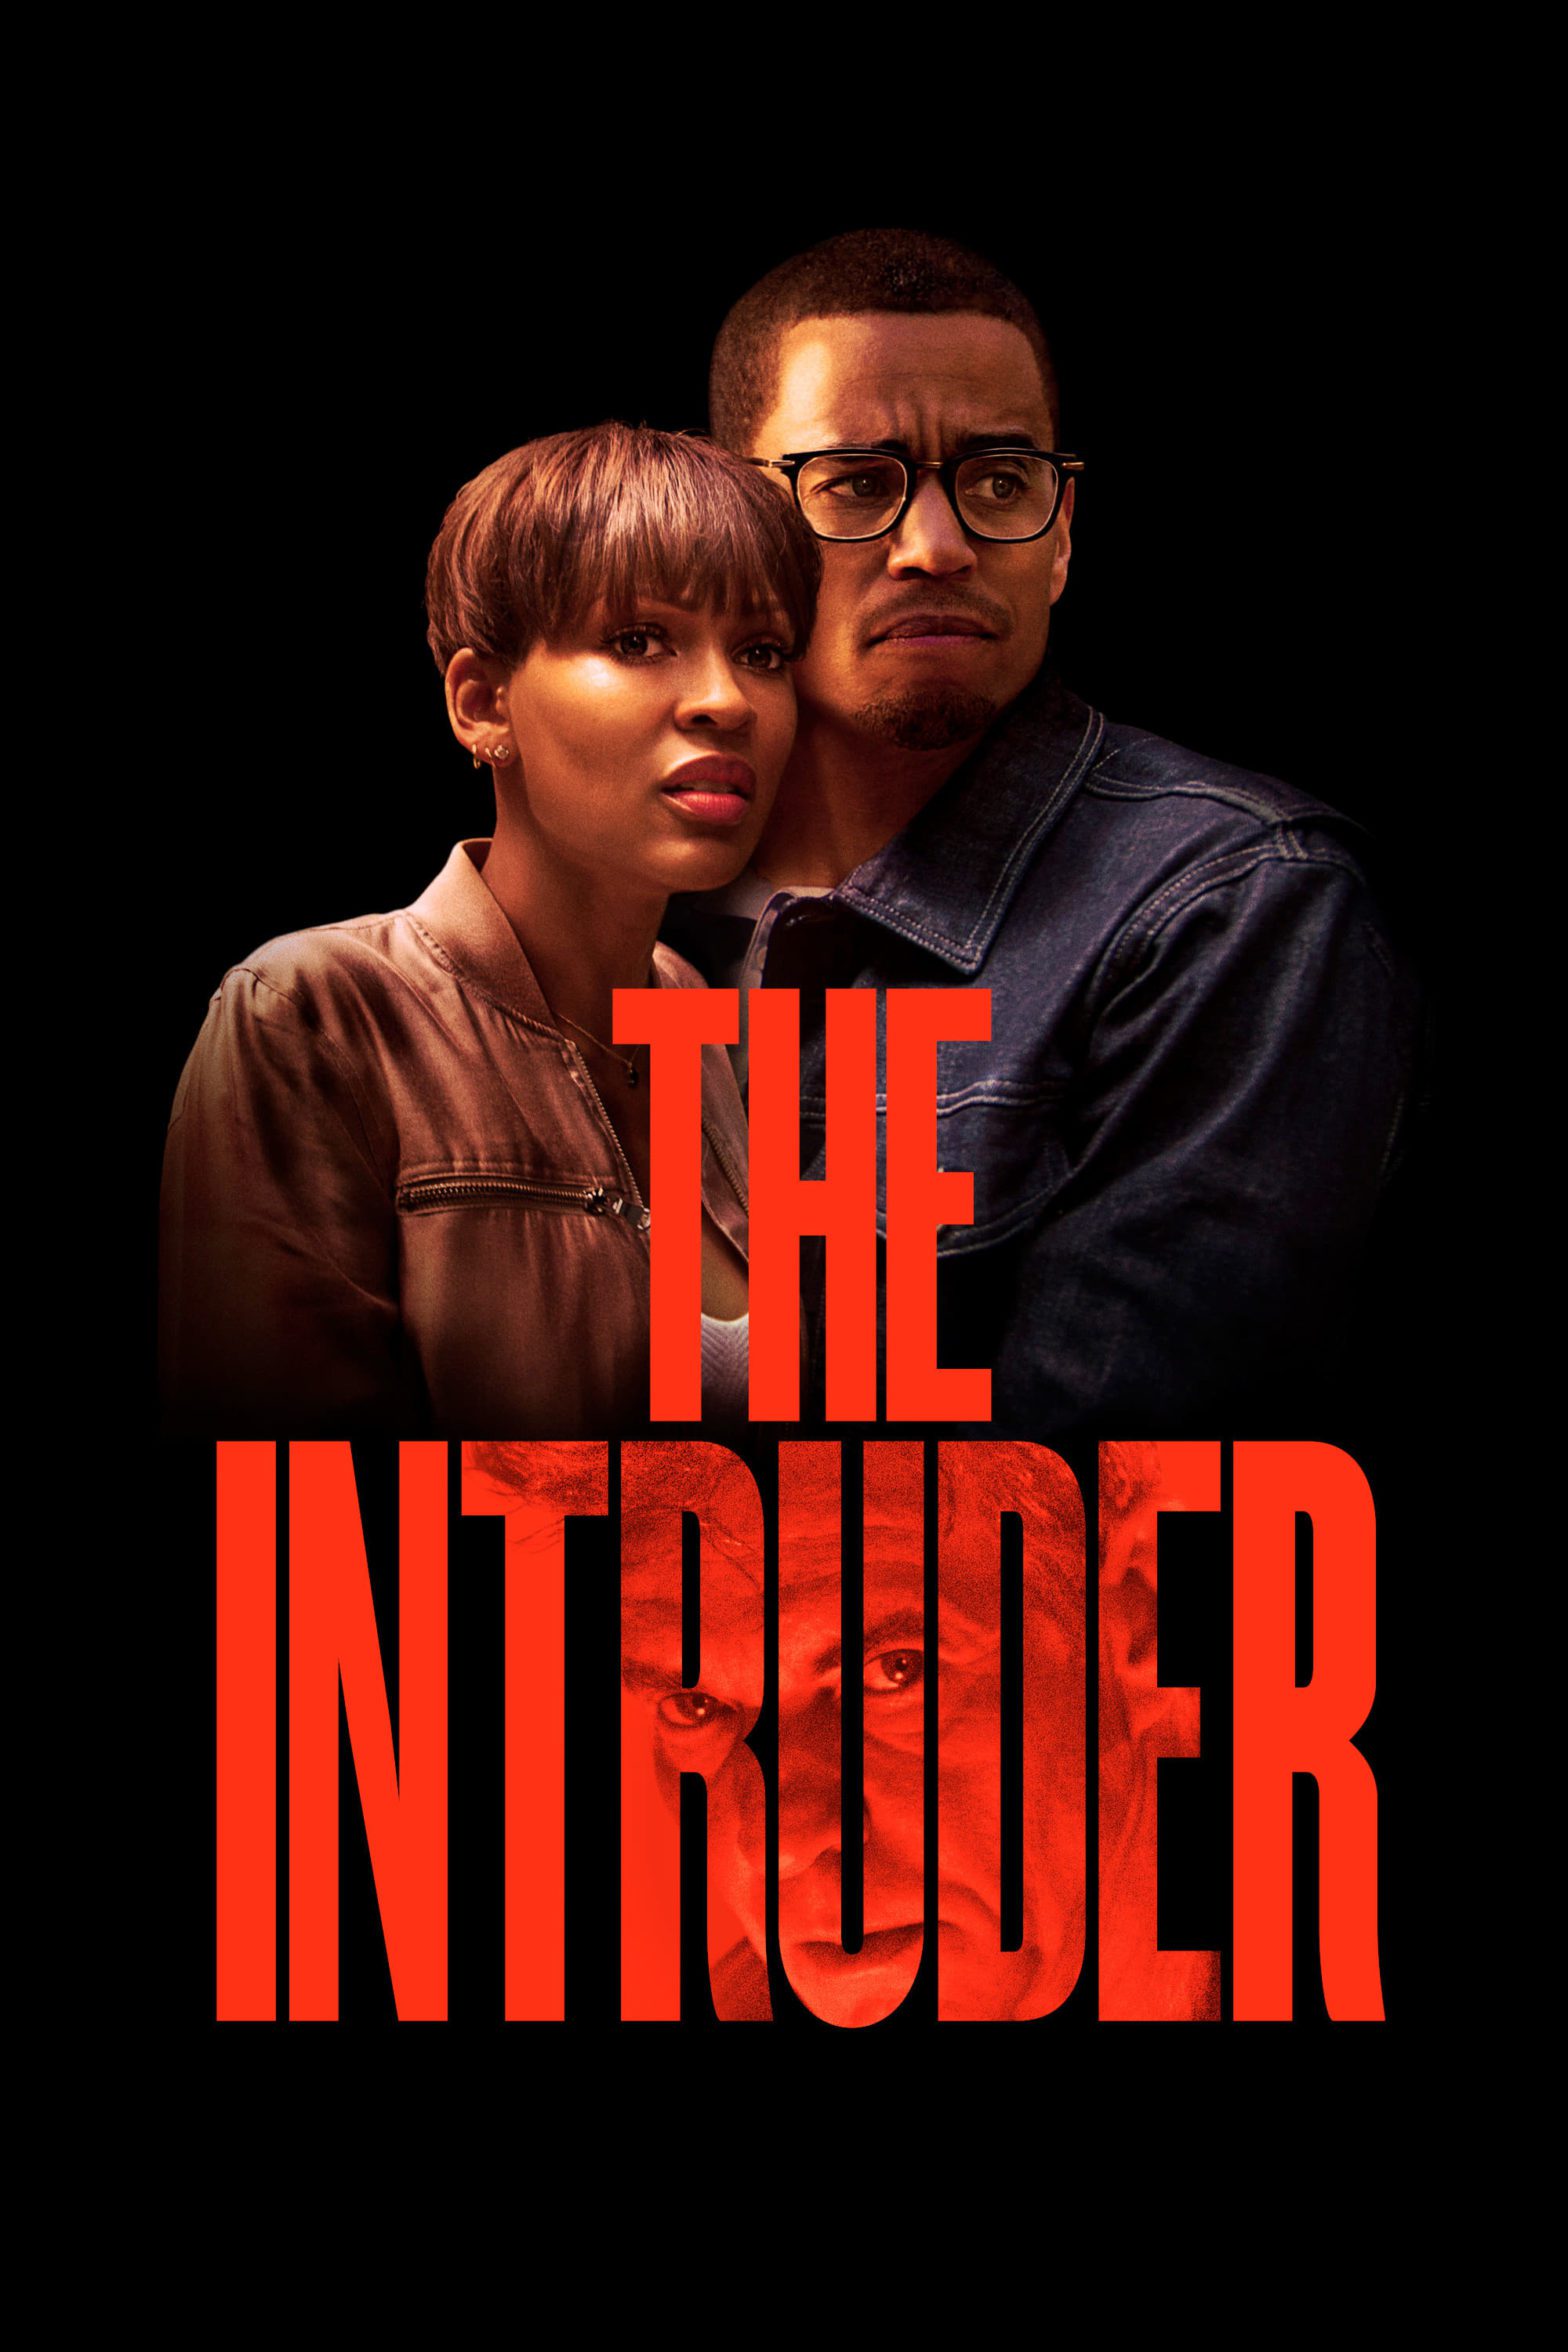 Poster for the movie "The Intruder"